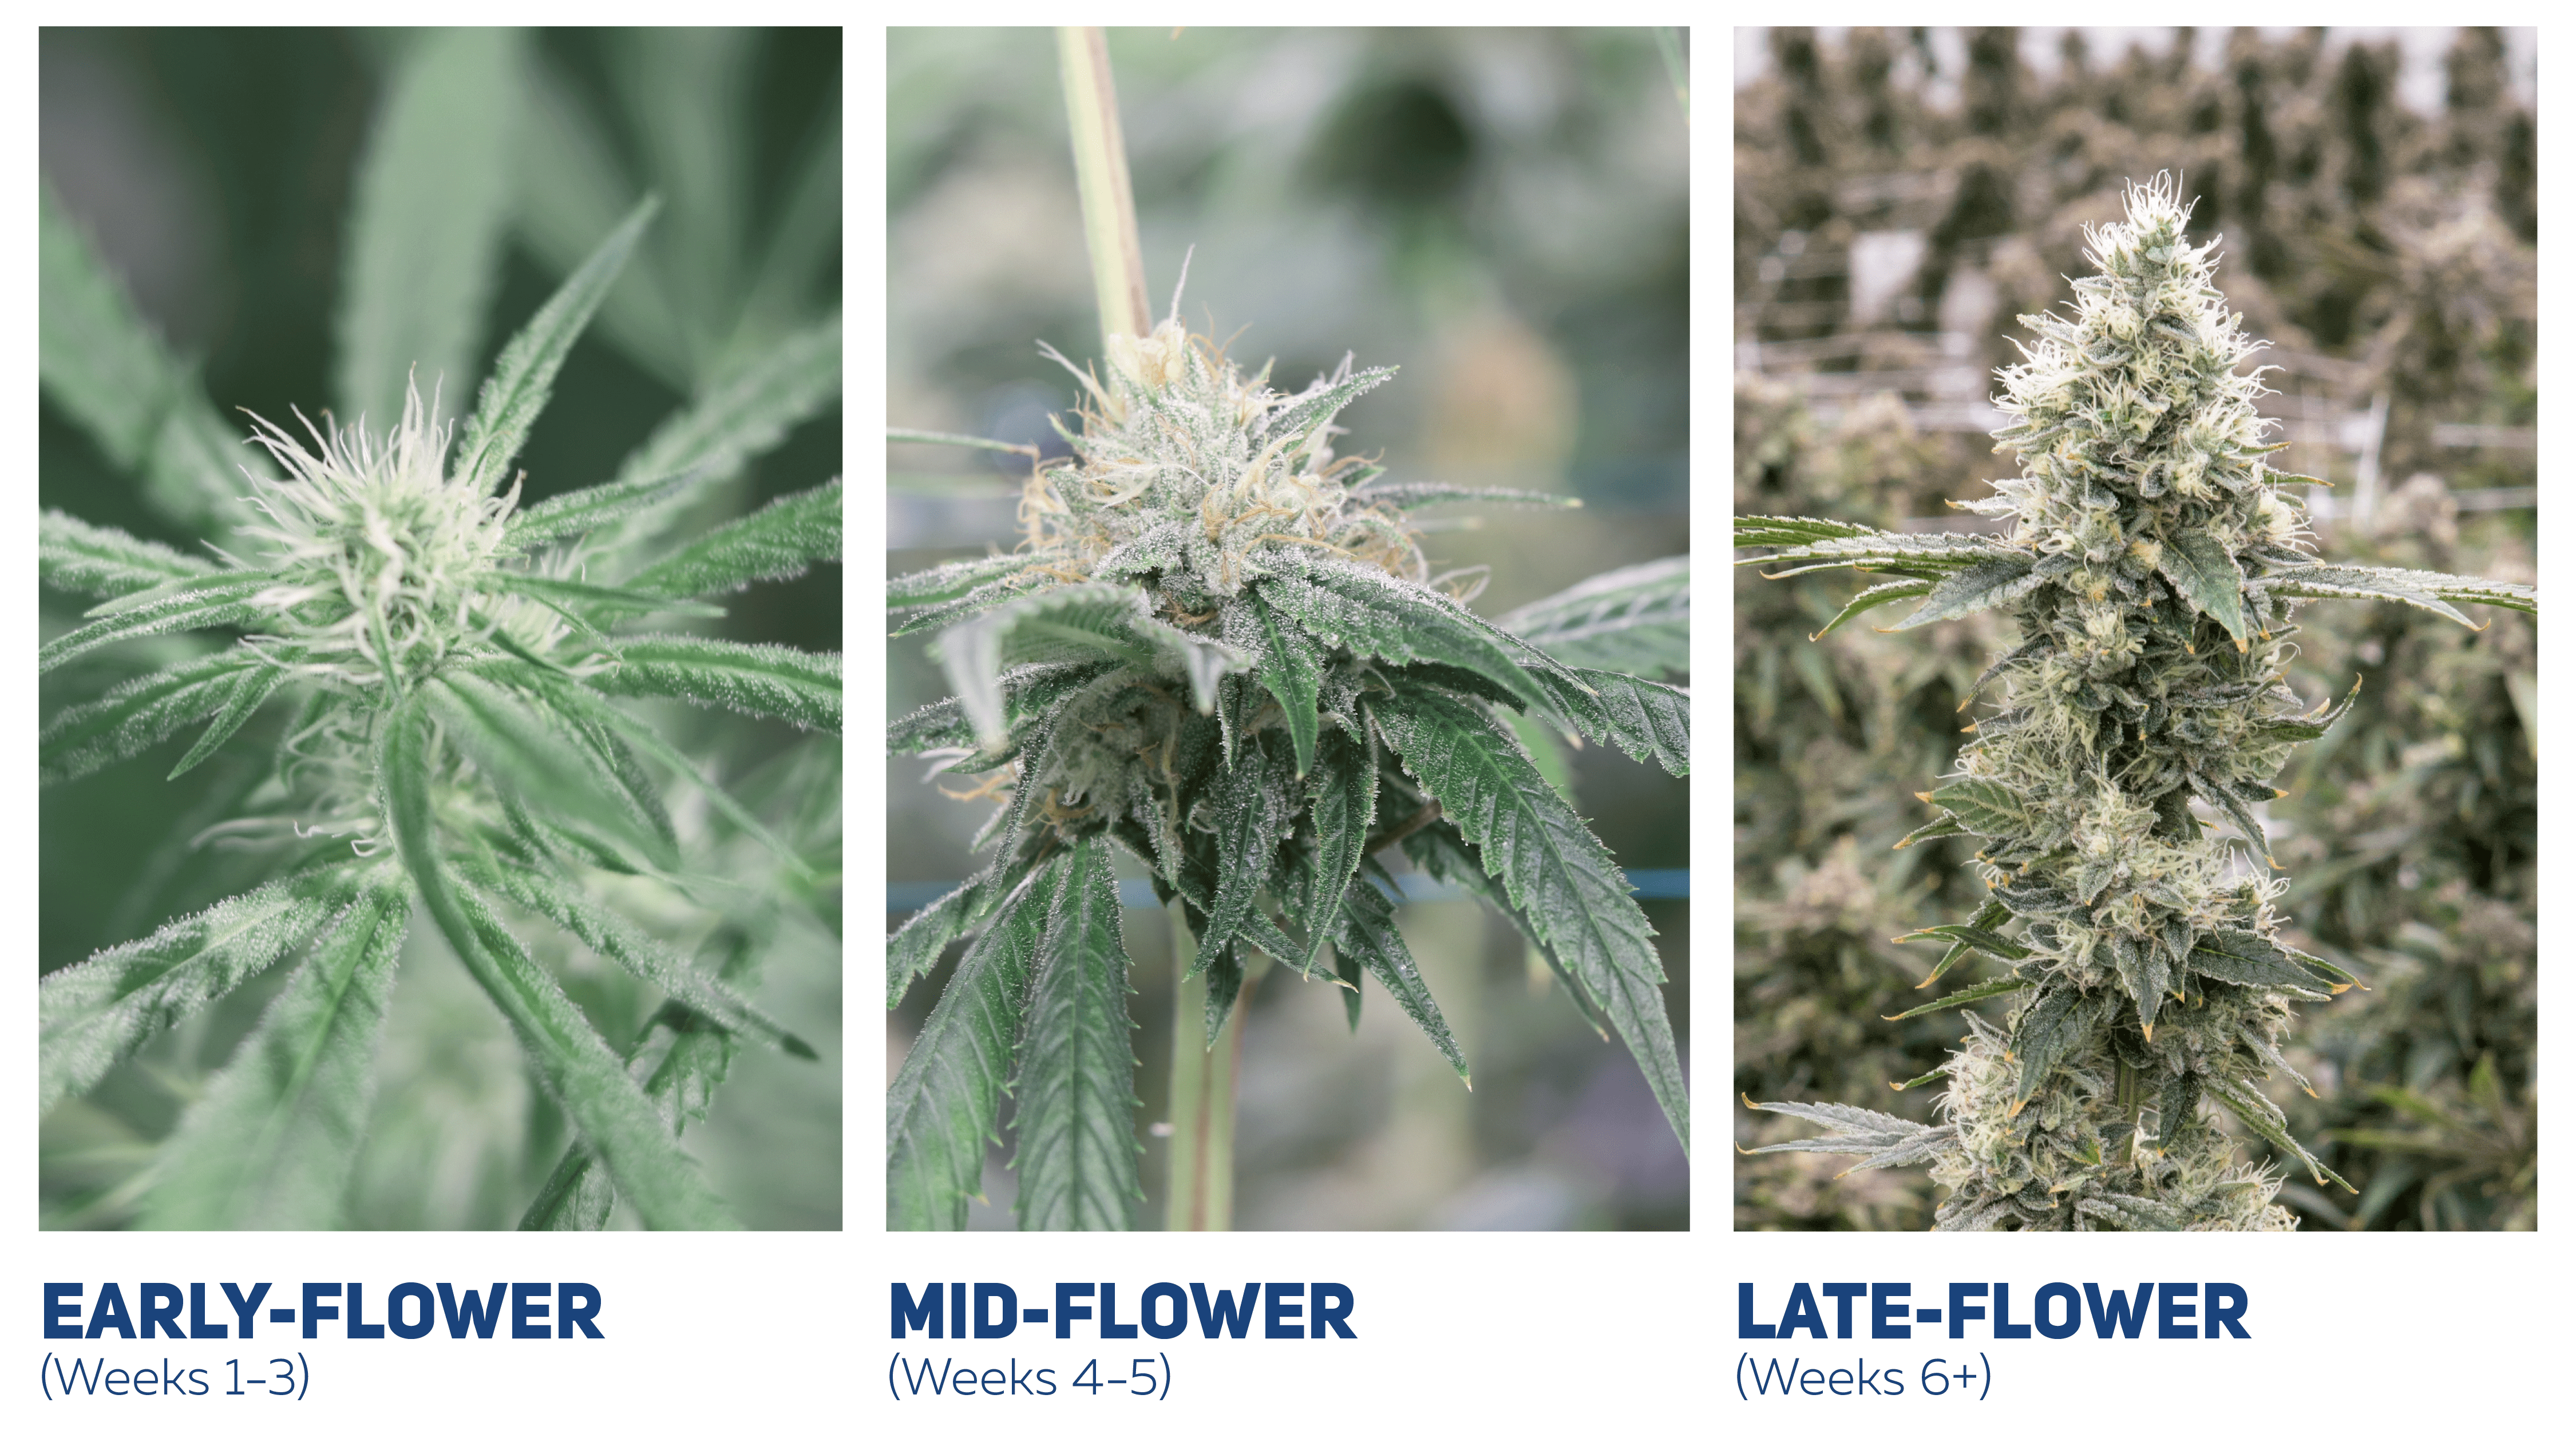 Pictures of the Cannabis Flowering Stages